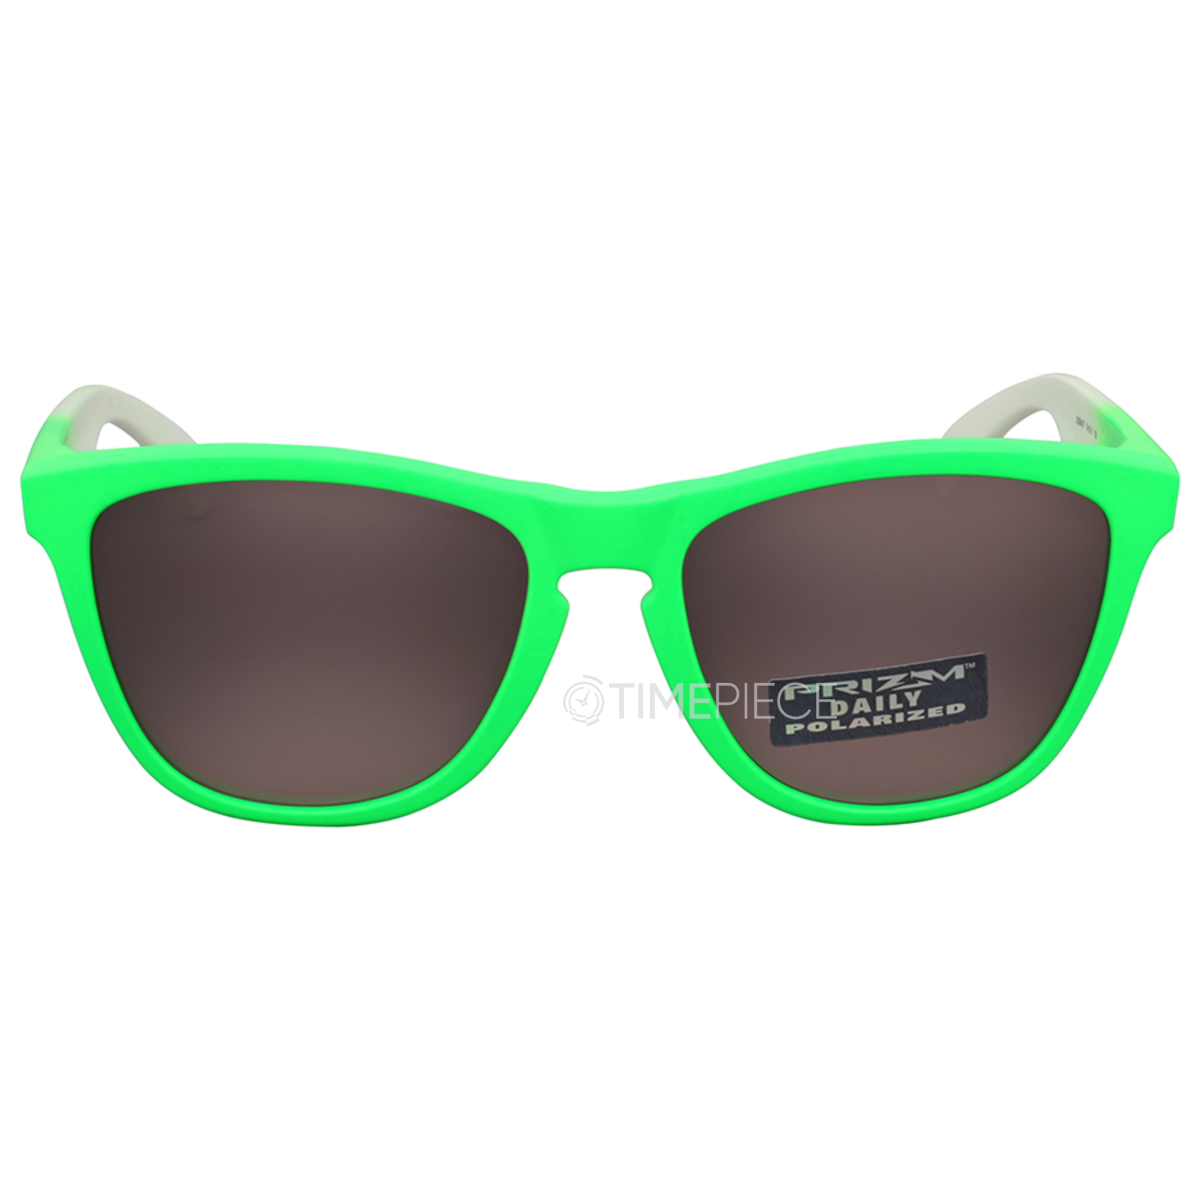 Oakley Frogskins Asia Fit Green Fade Polarized Sunglasses